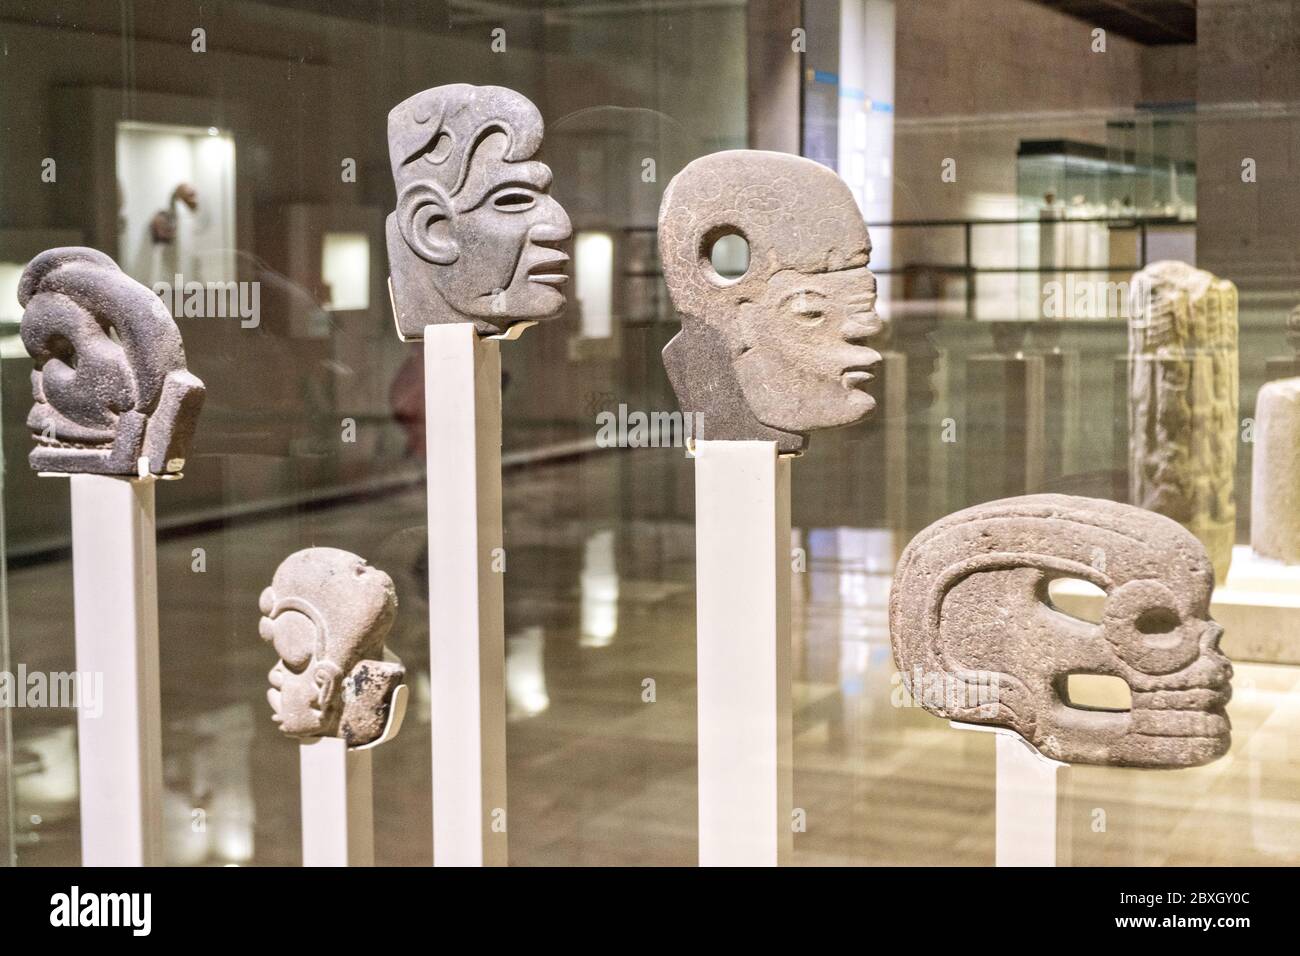 Stone sculptures from prehispanic Mesoamerican cultures on display at the Museum of Anthropology in the historic center of Xalapa, Veracruz, Mexico. Stock Photo